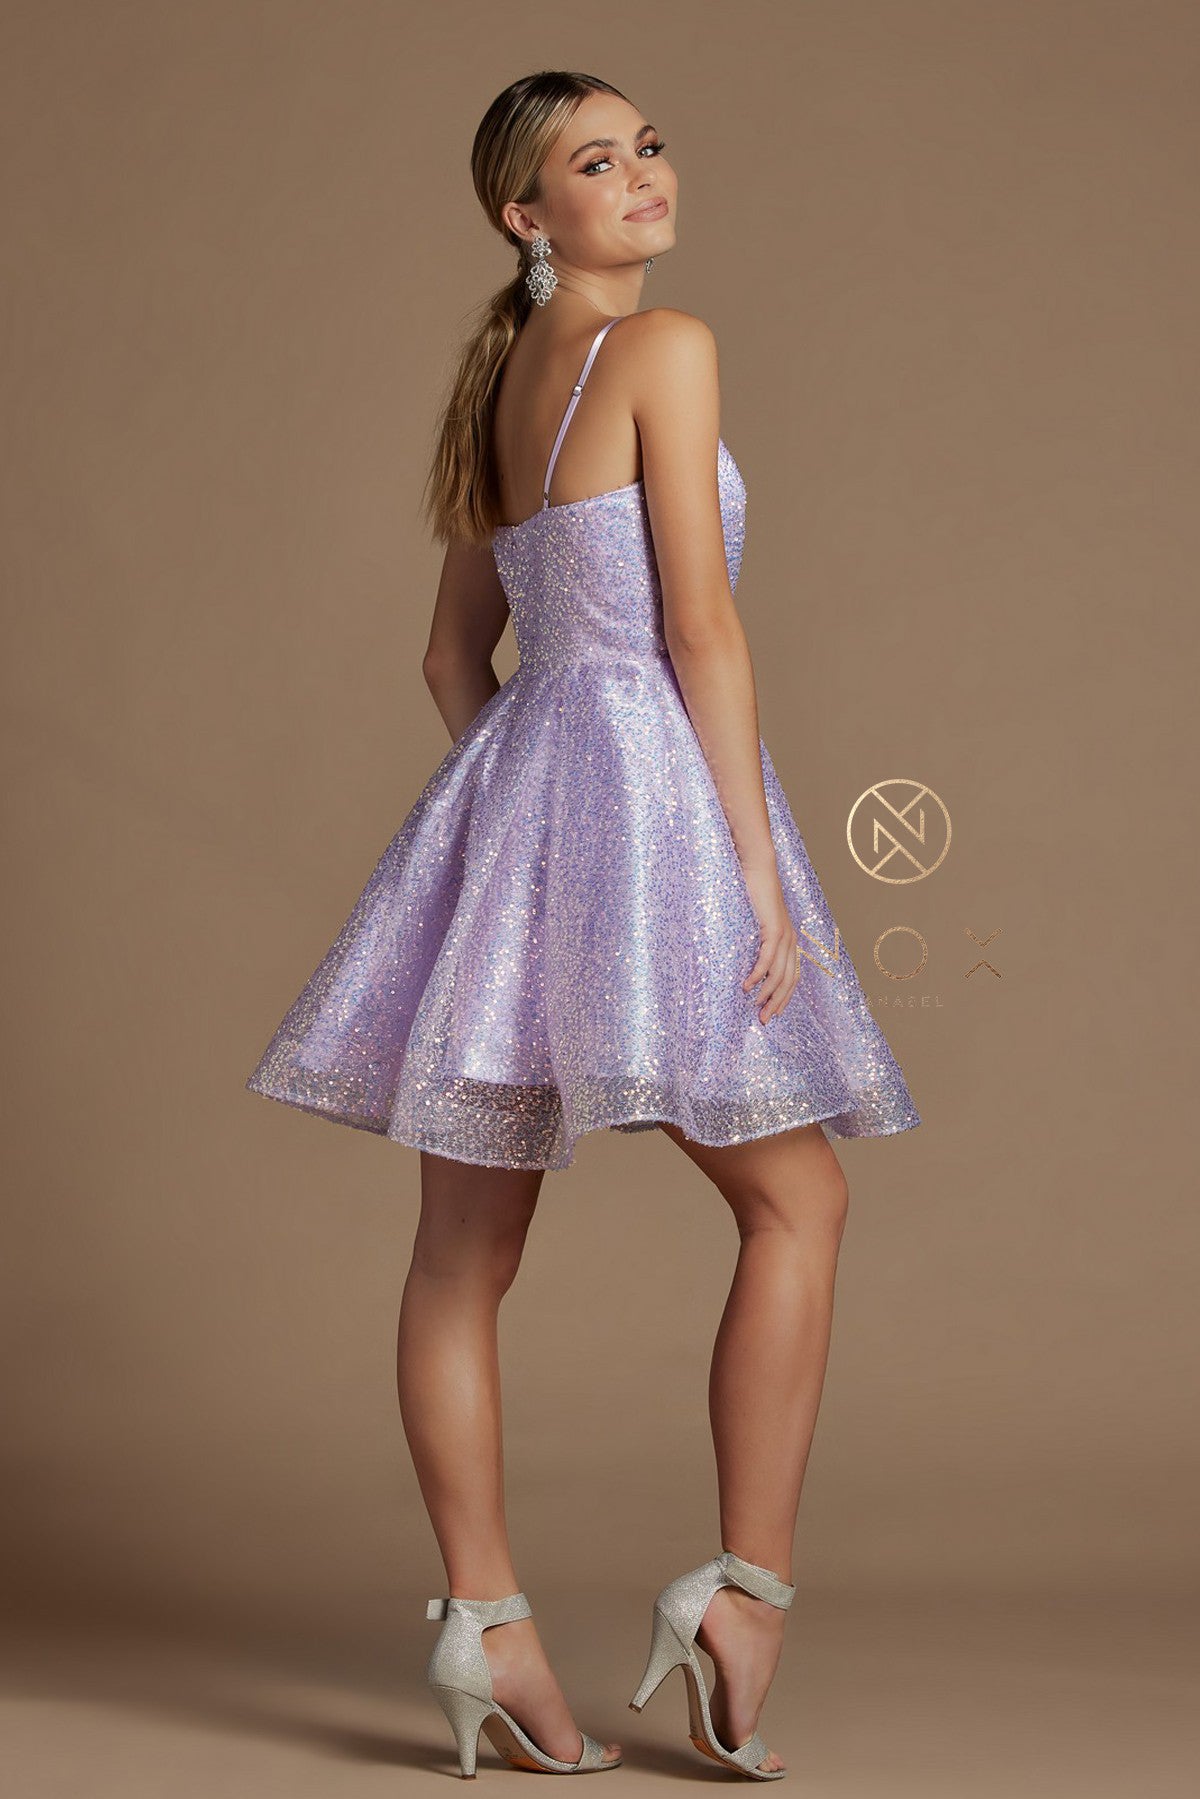 Nox Anabel R703 Short Fit & Flare Sequin Formal Cocktails Dress V Neck Gown Ruched V neckline with iridescent sequin accented fabric. Adjustable straps to avoid alterations!  Available Sizes: 2-16  Available Colors: Black/Multi, White/Multi, Lilac/Multi   